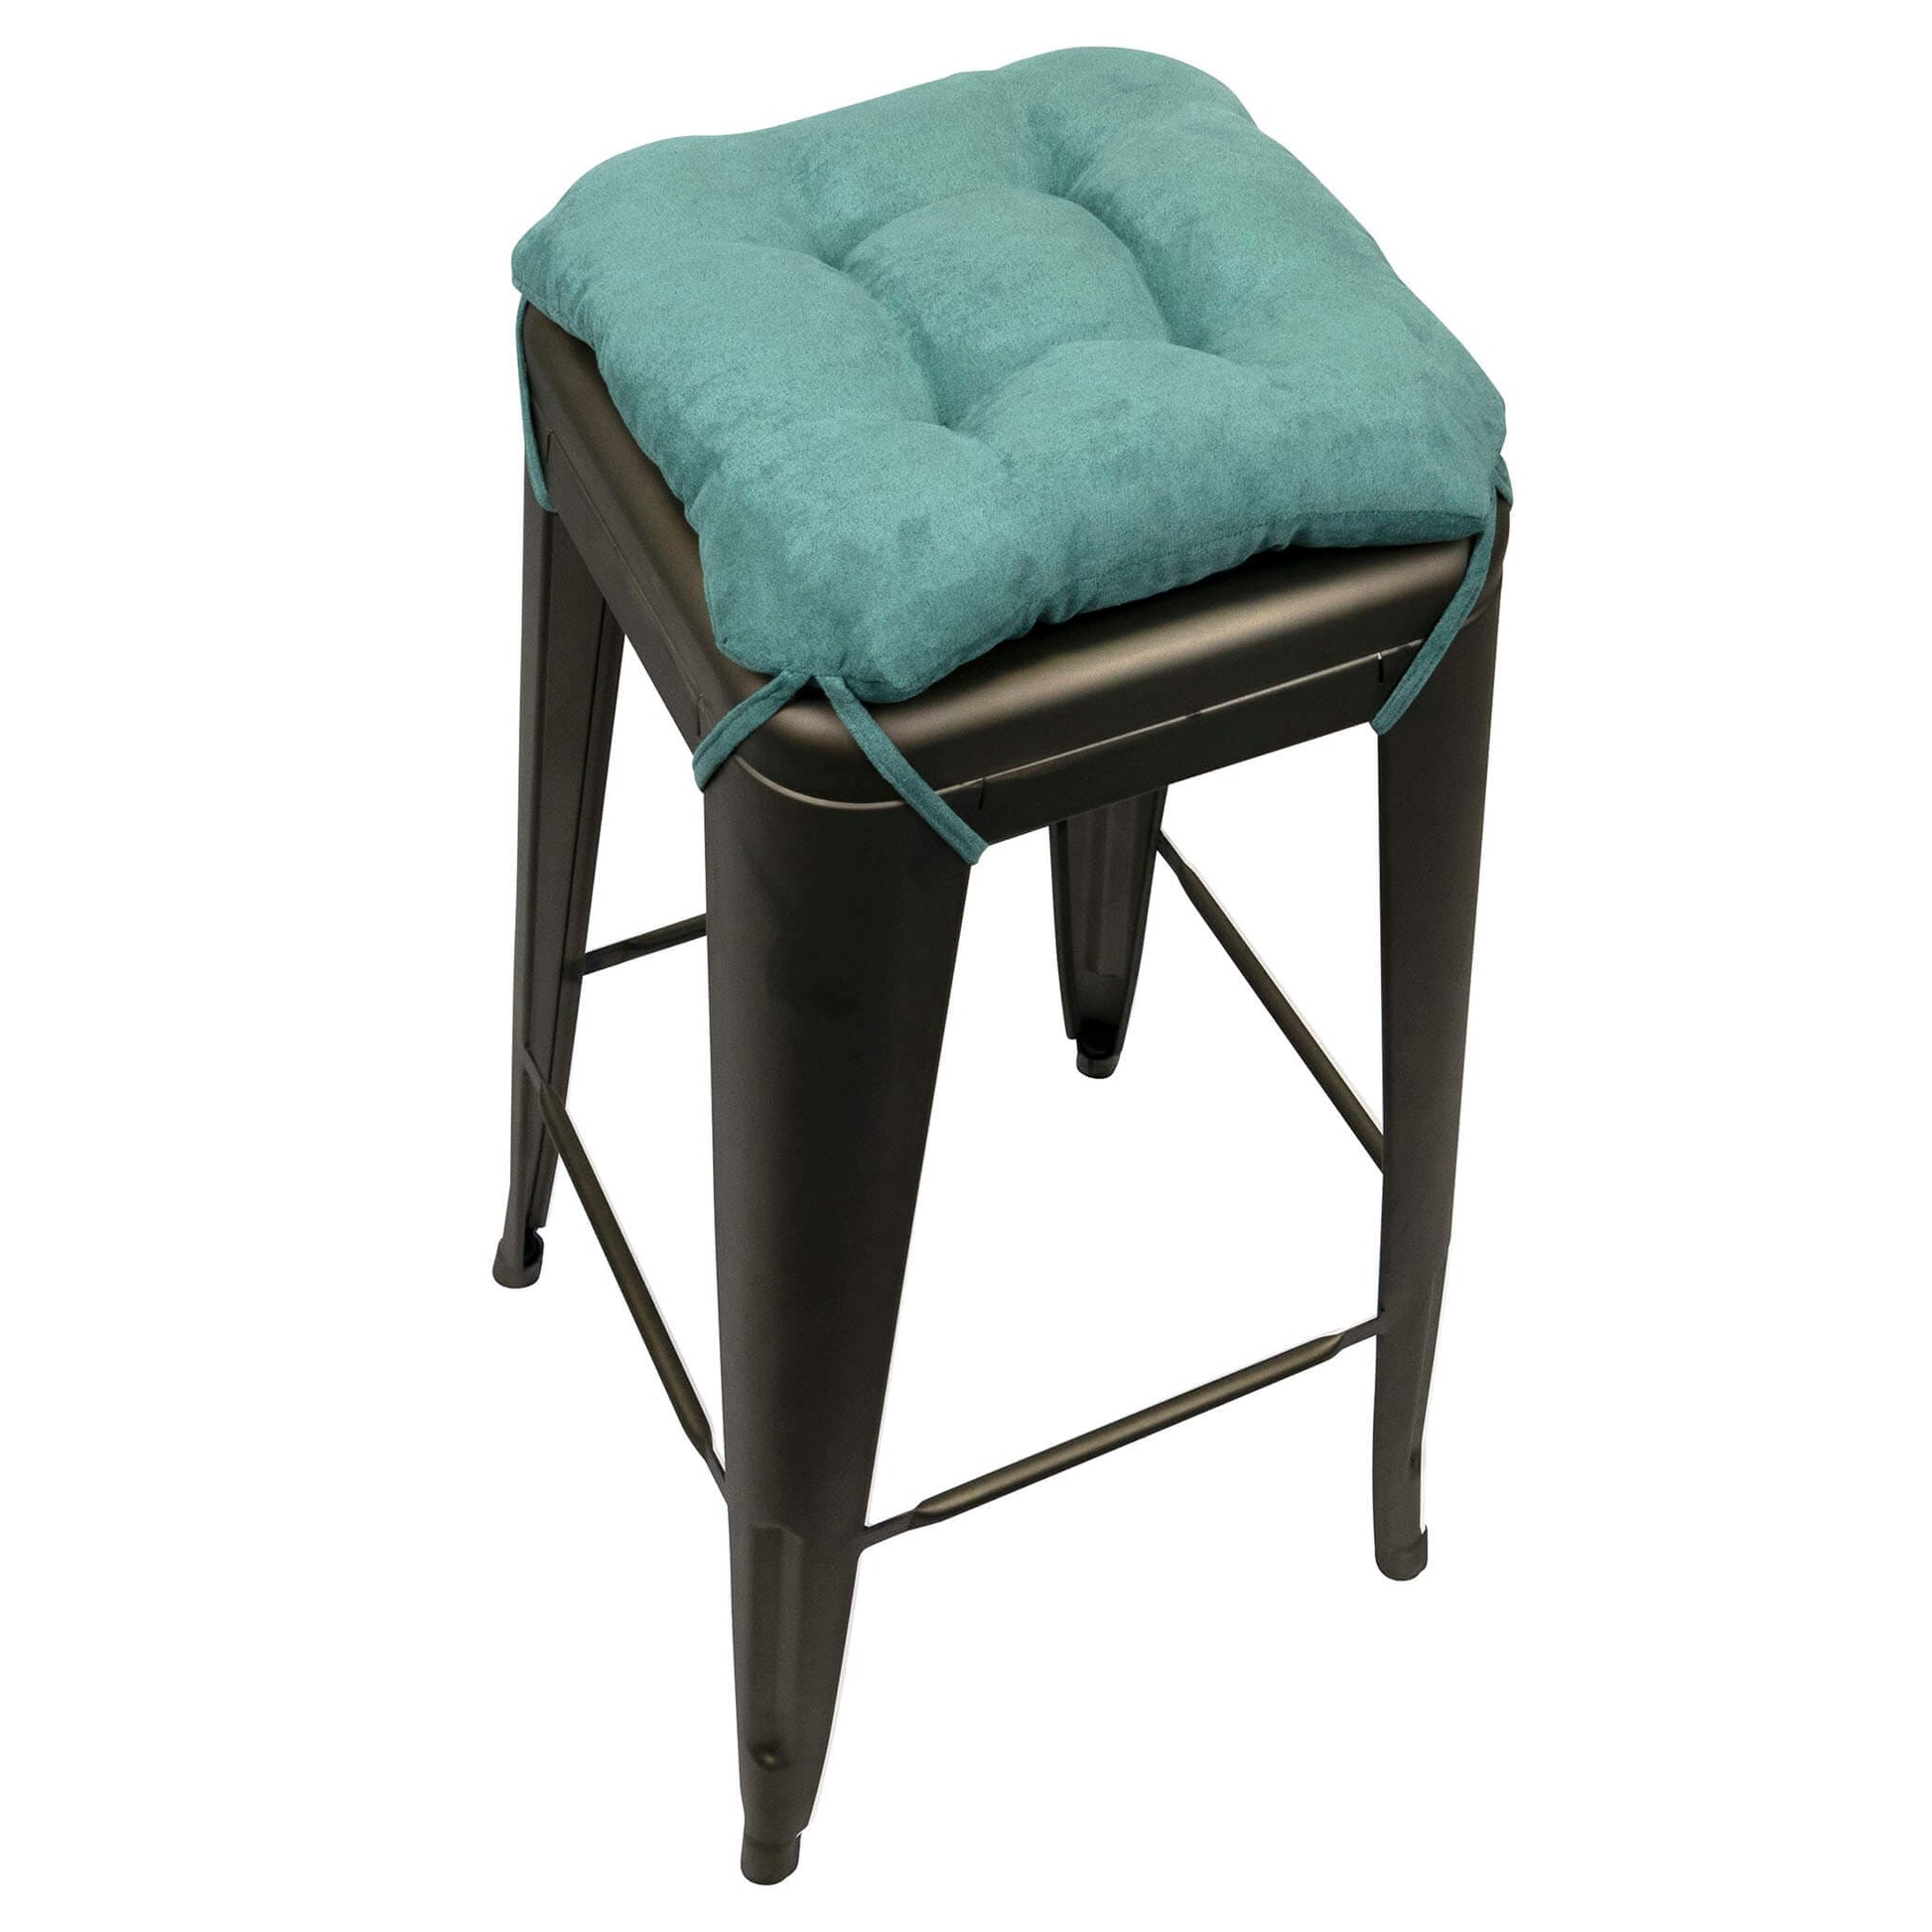 Micro-suede Turquoise Square Industrial Bar Stool Cushion - 12 – Barnett  Home Decor